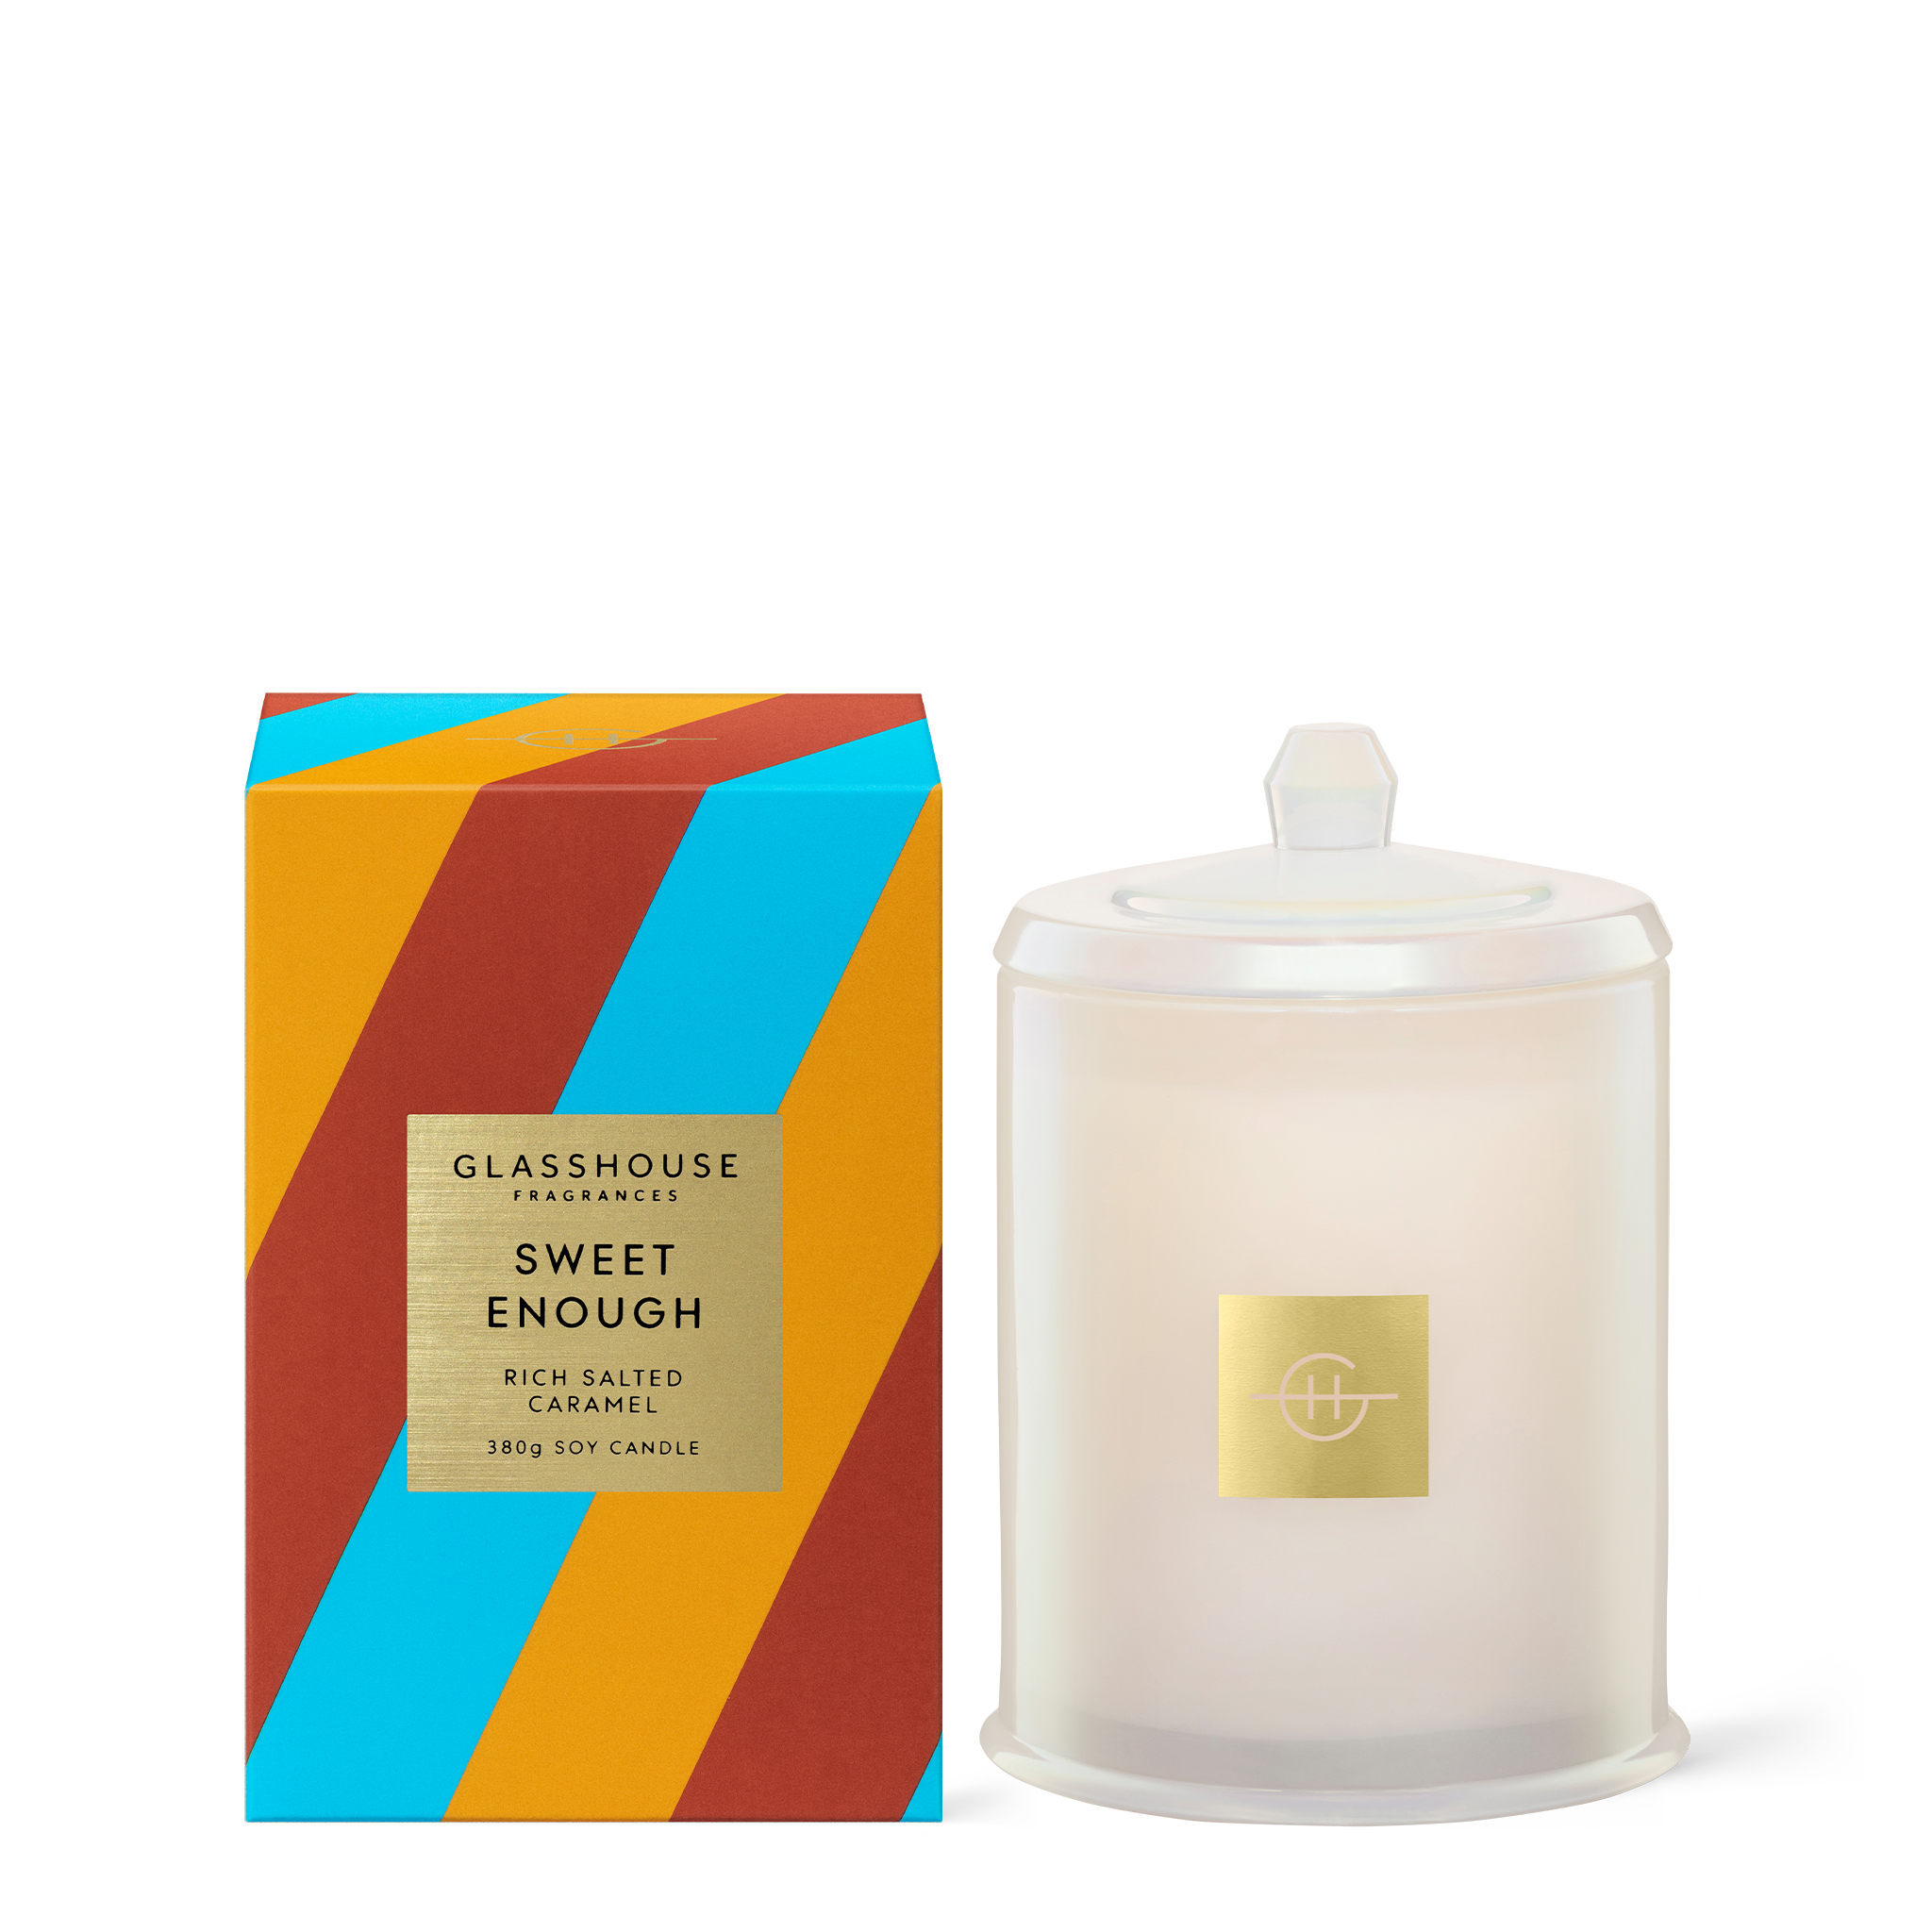 Glasshouse Fragrances Sweet Enough Salted Caramel 380g Soy Candle with box